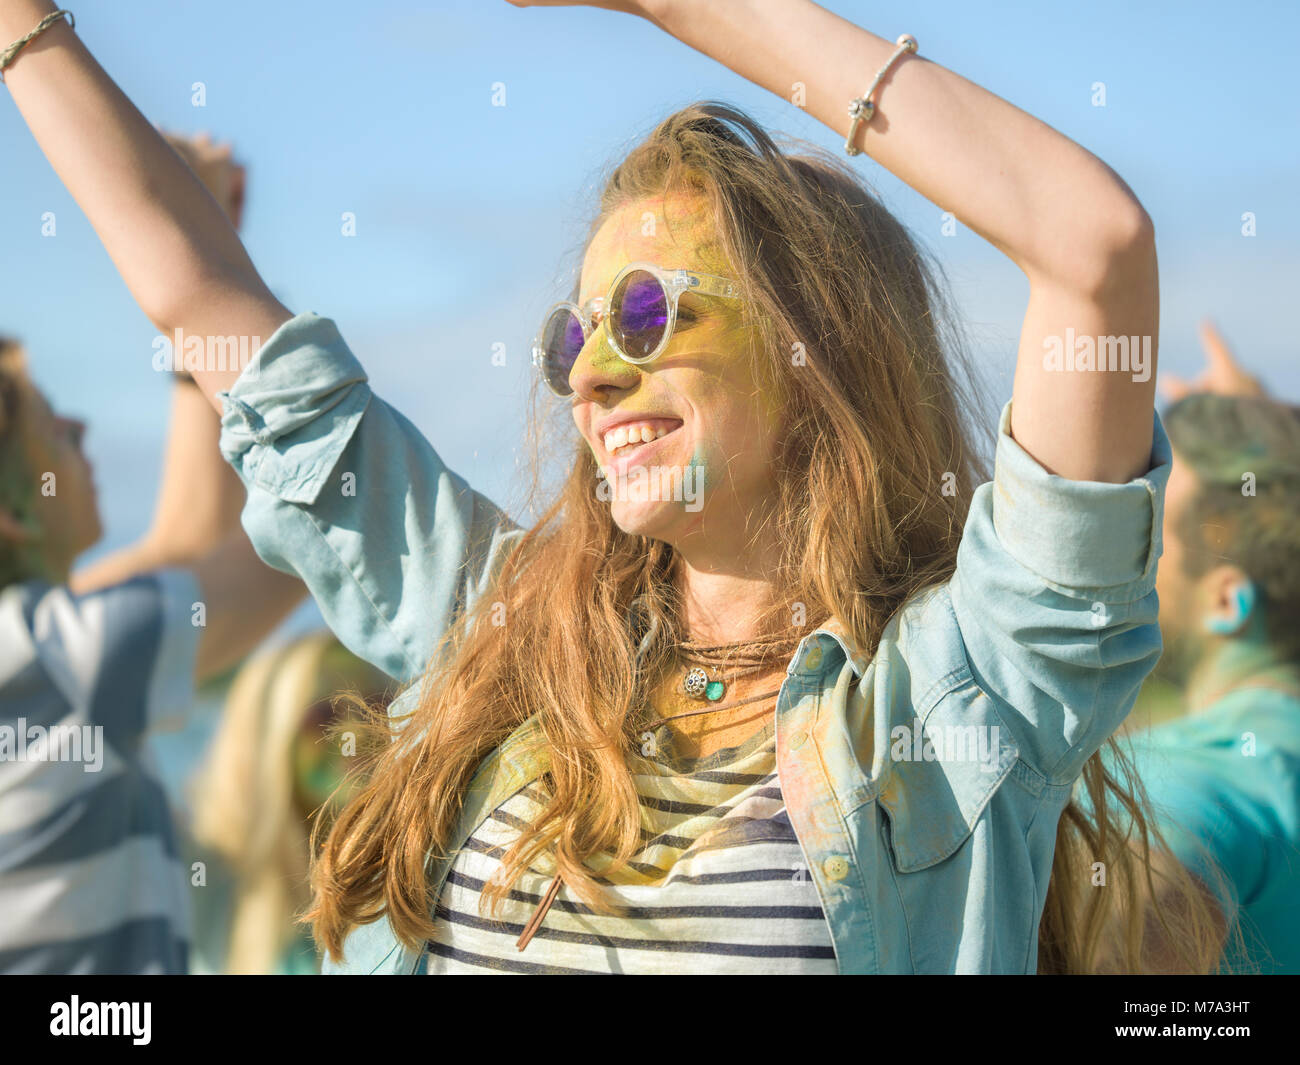 Close-up Portrait of a Beautiful Young Girl with Sunglasses Standing in the Crowd of People Celebrating Holi Festival. People Throwing Colorful Powder Stock Photo